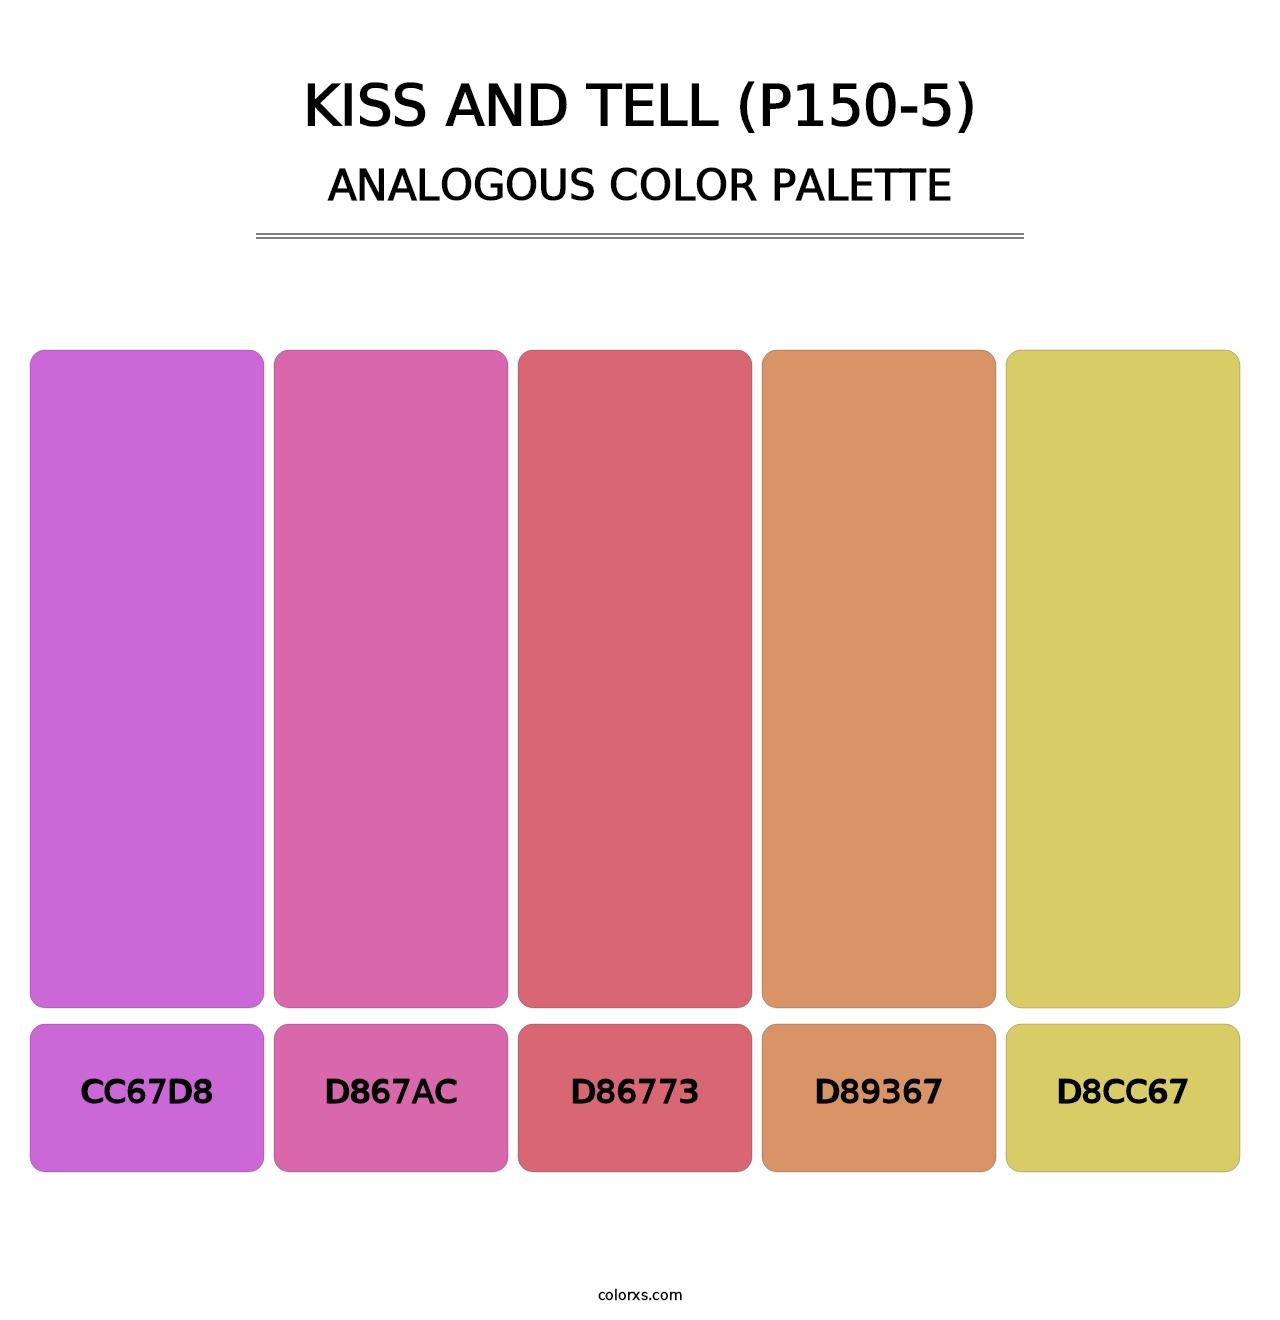 Kiss And Tell (P150-5) - Analogous Color Palette